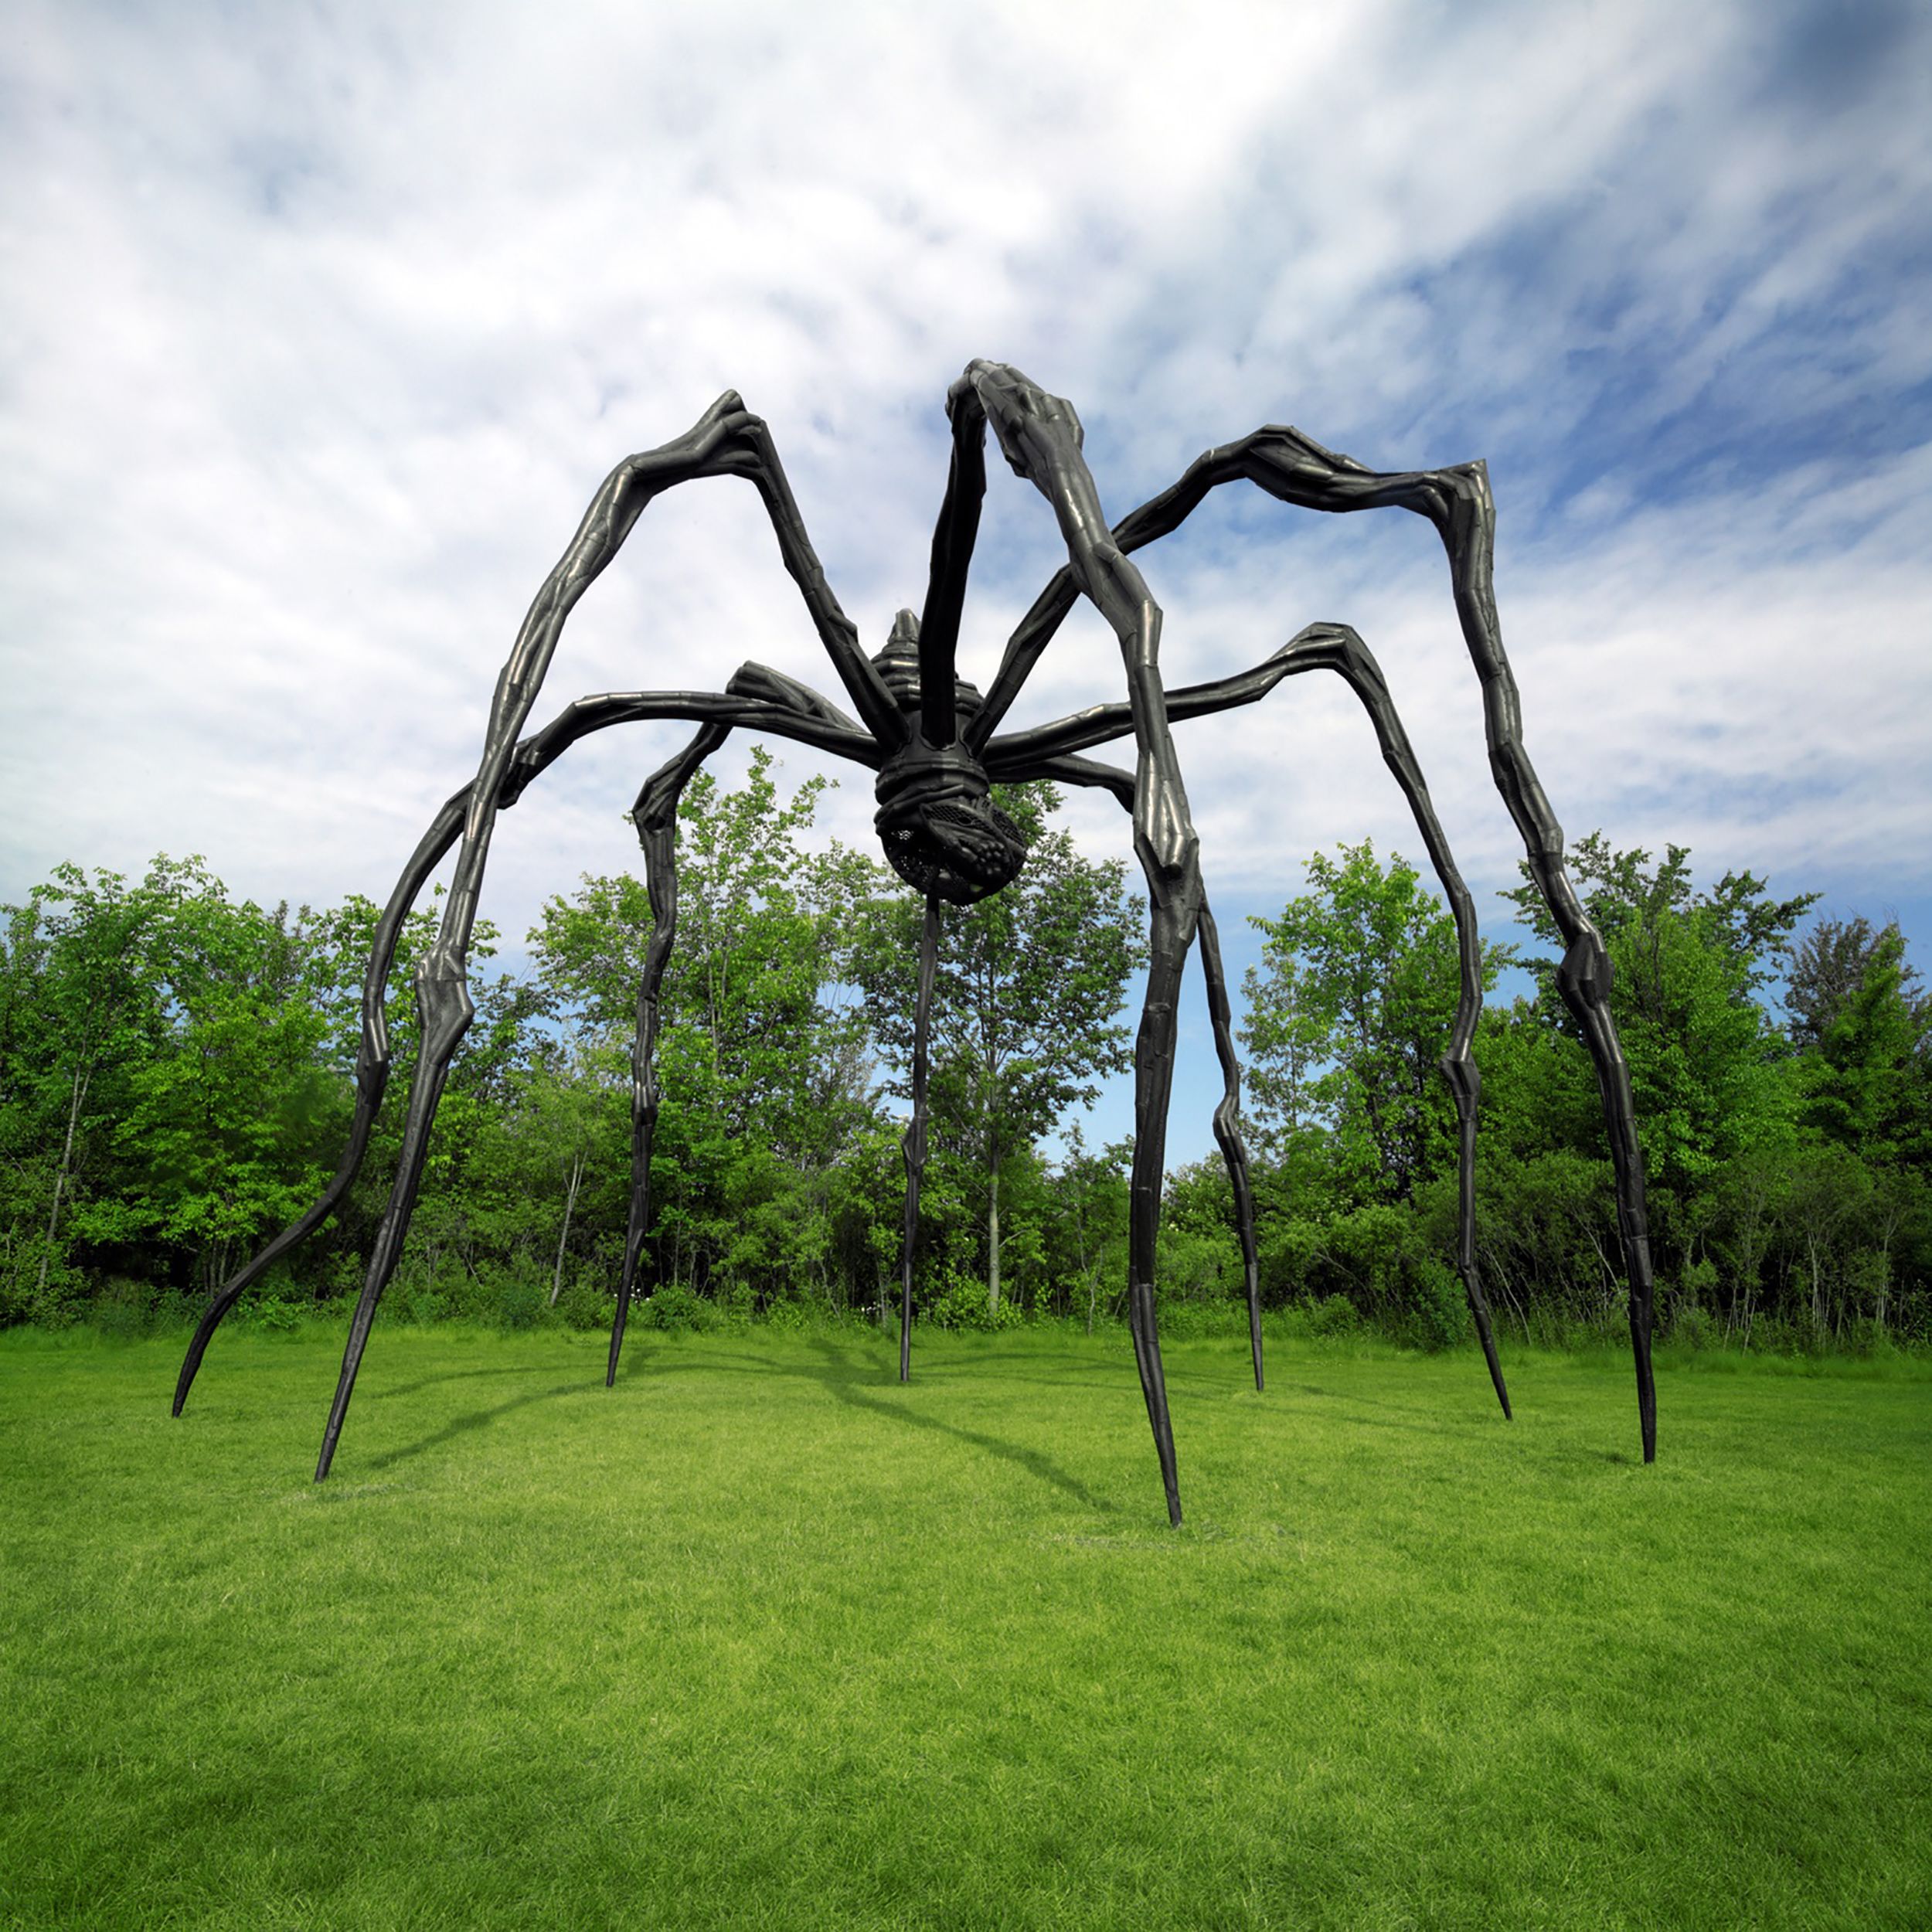 Artist Louise Bourgeois W. Marble Piece Titled Sleep, Ii at the